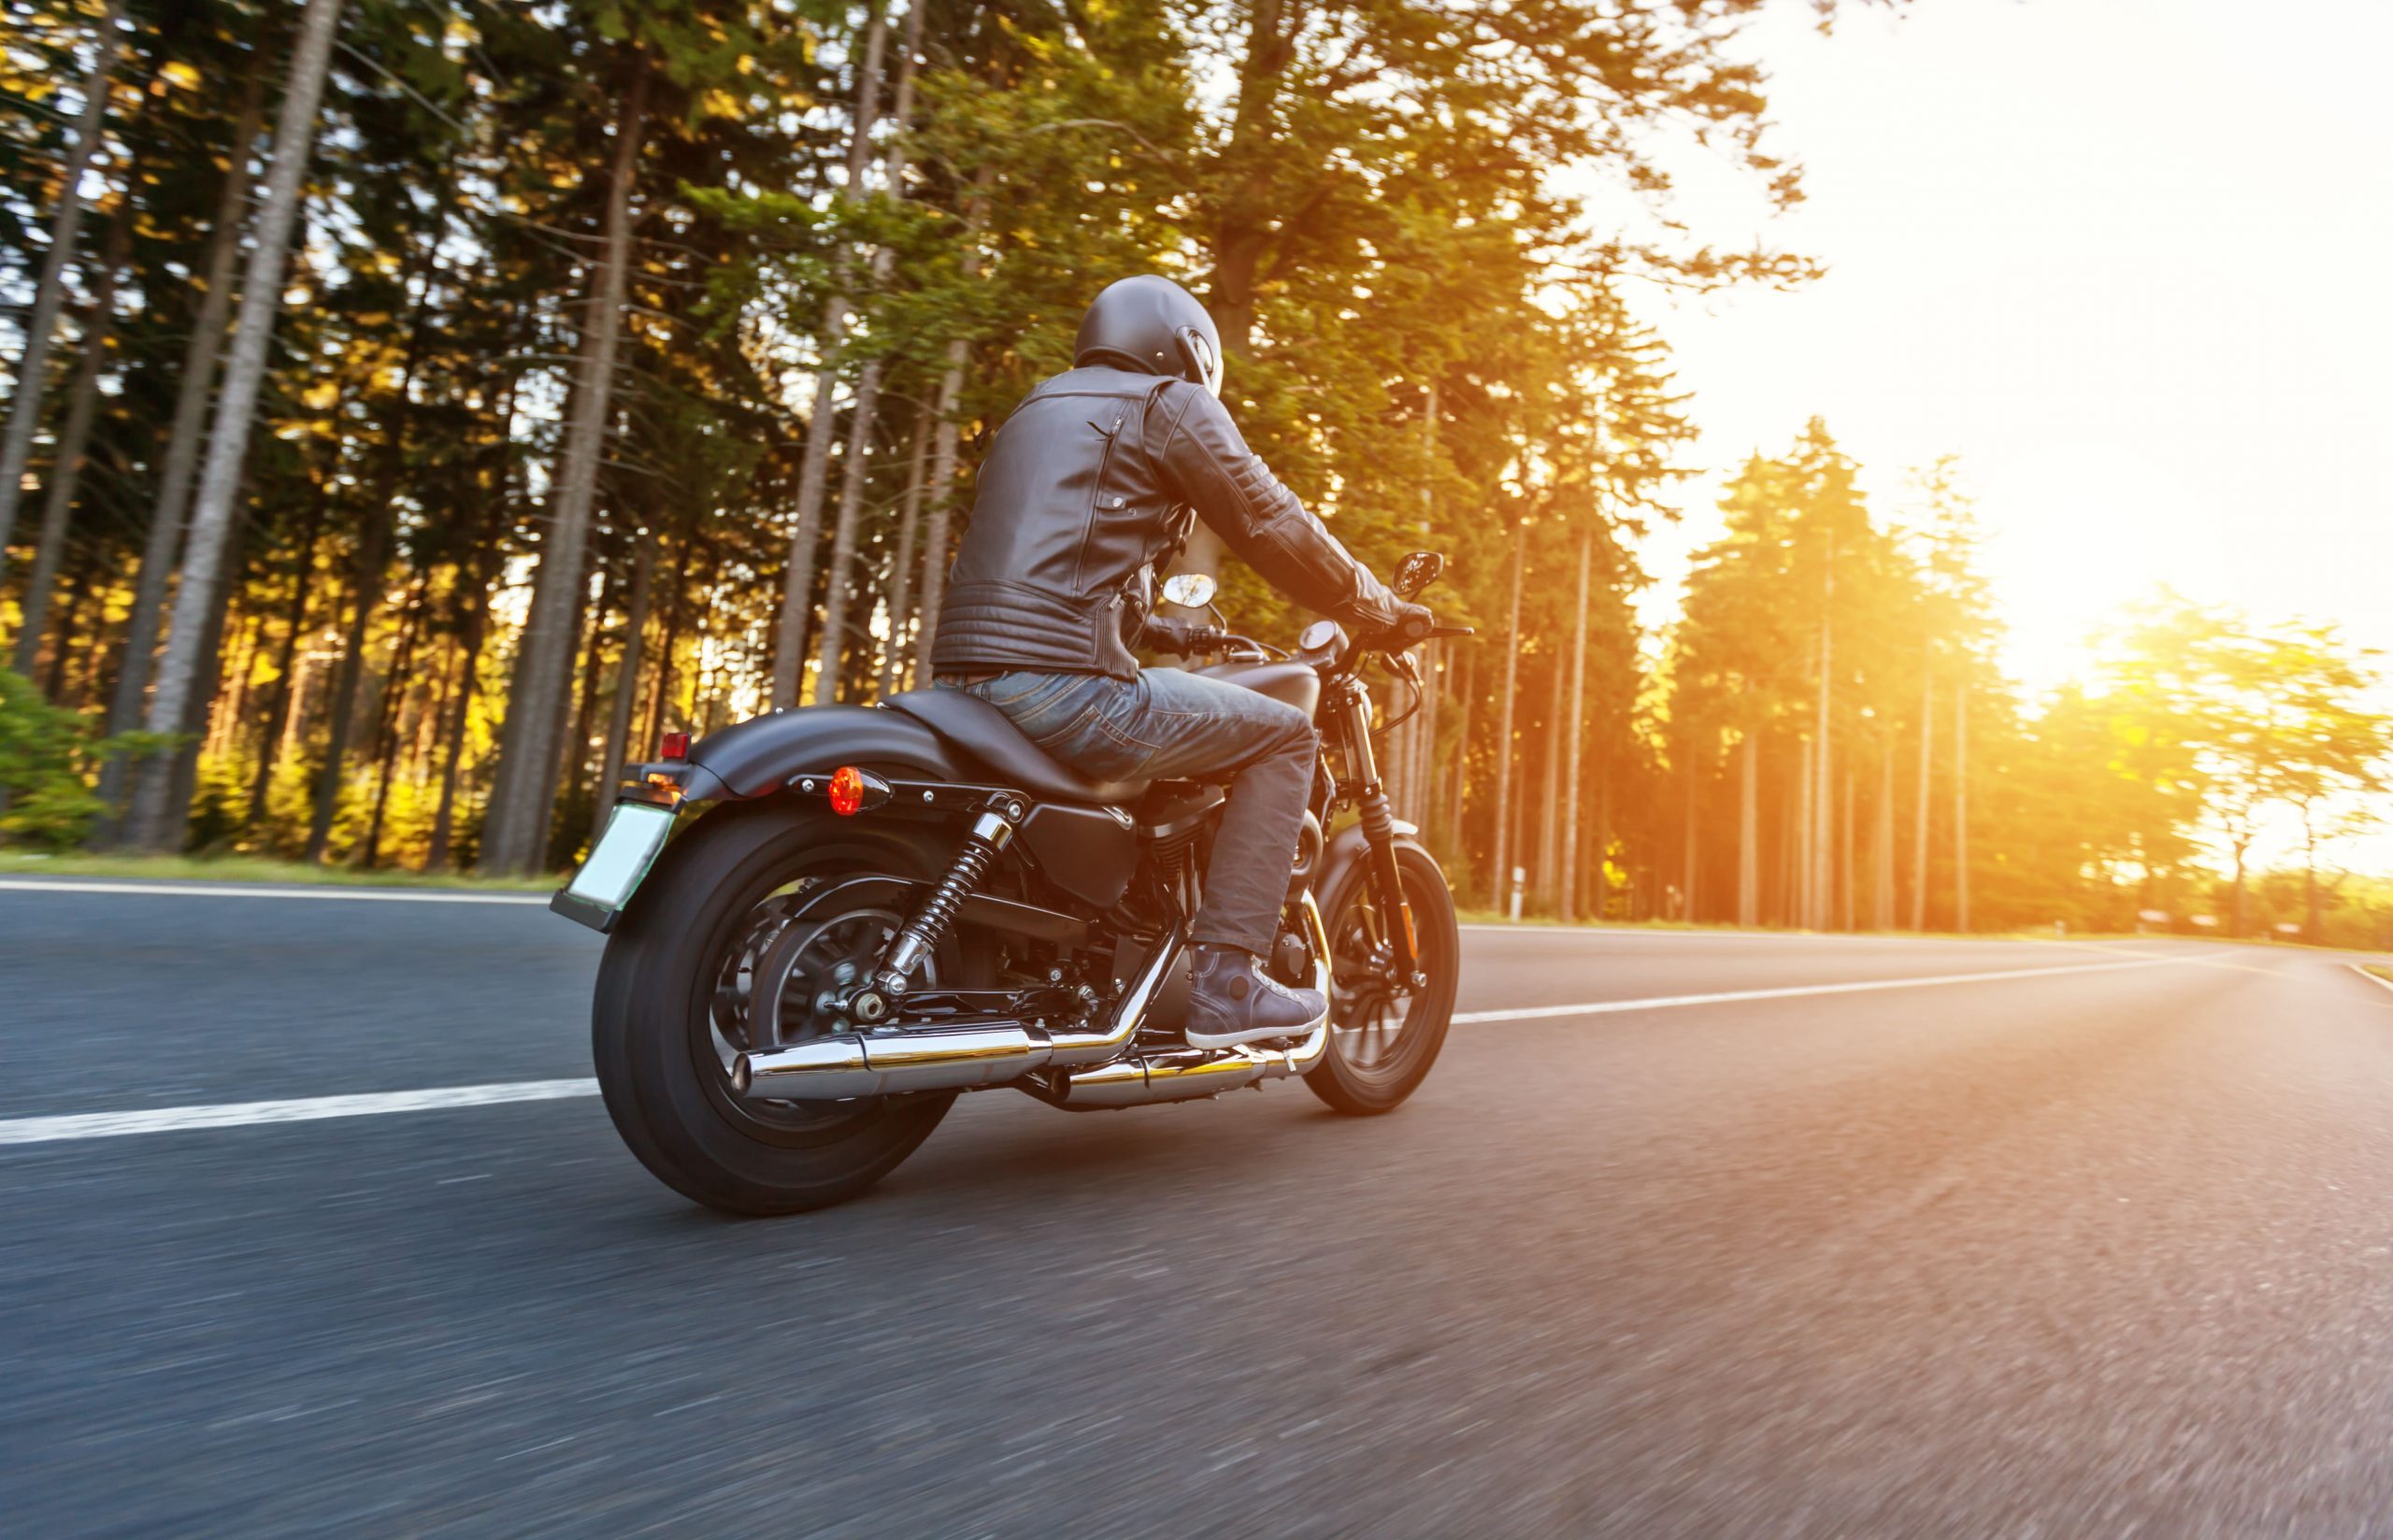 Planning a Summer Riding Trip? Read This First